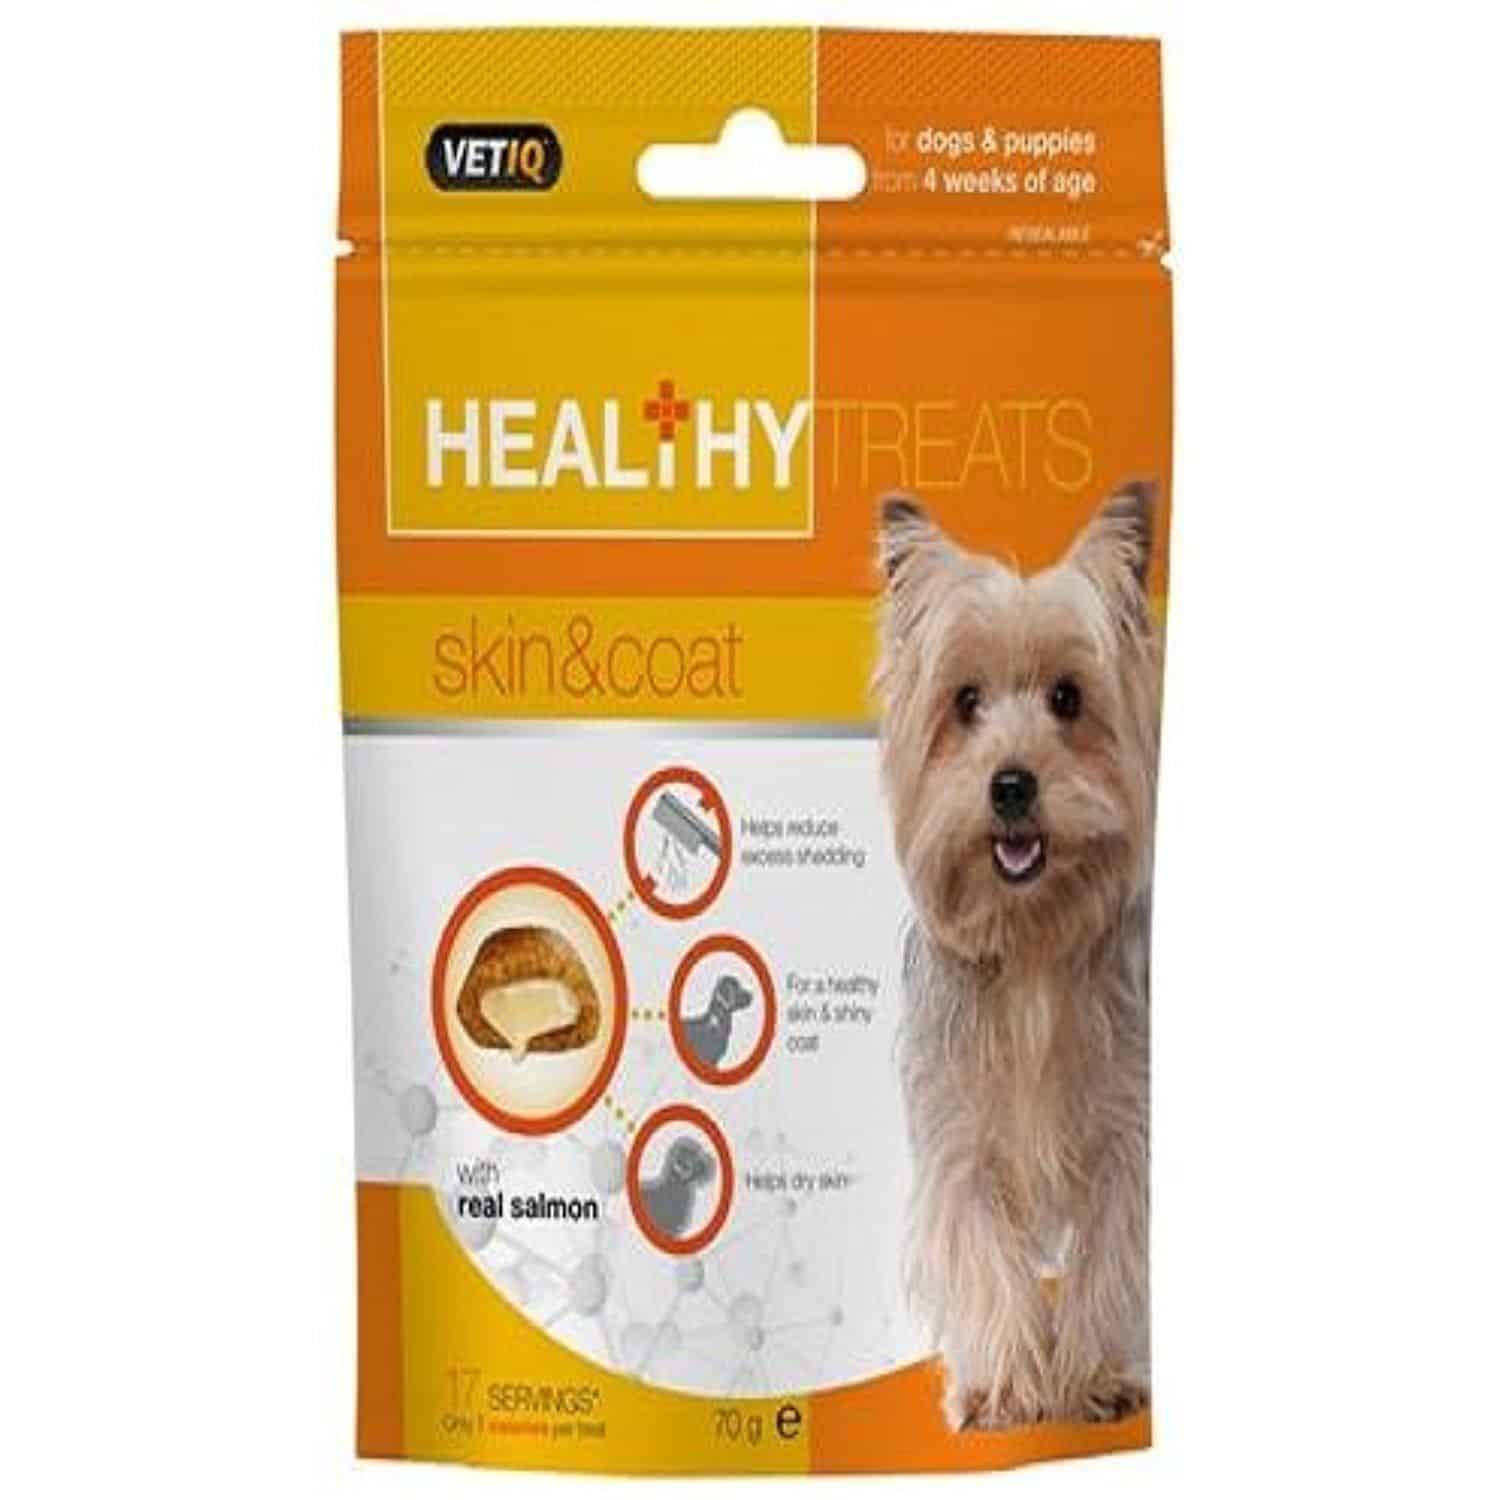 M& C Healthy Treats Skin and Coat for Dogs/Puppies @@@ If you want to ...